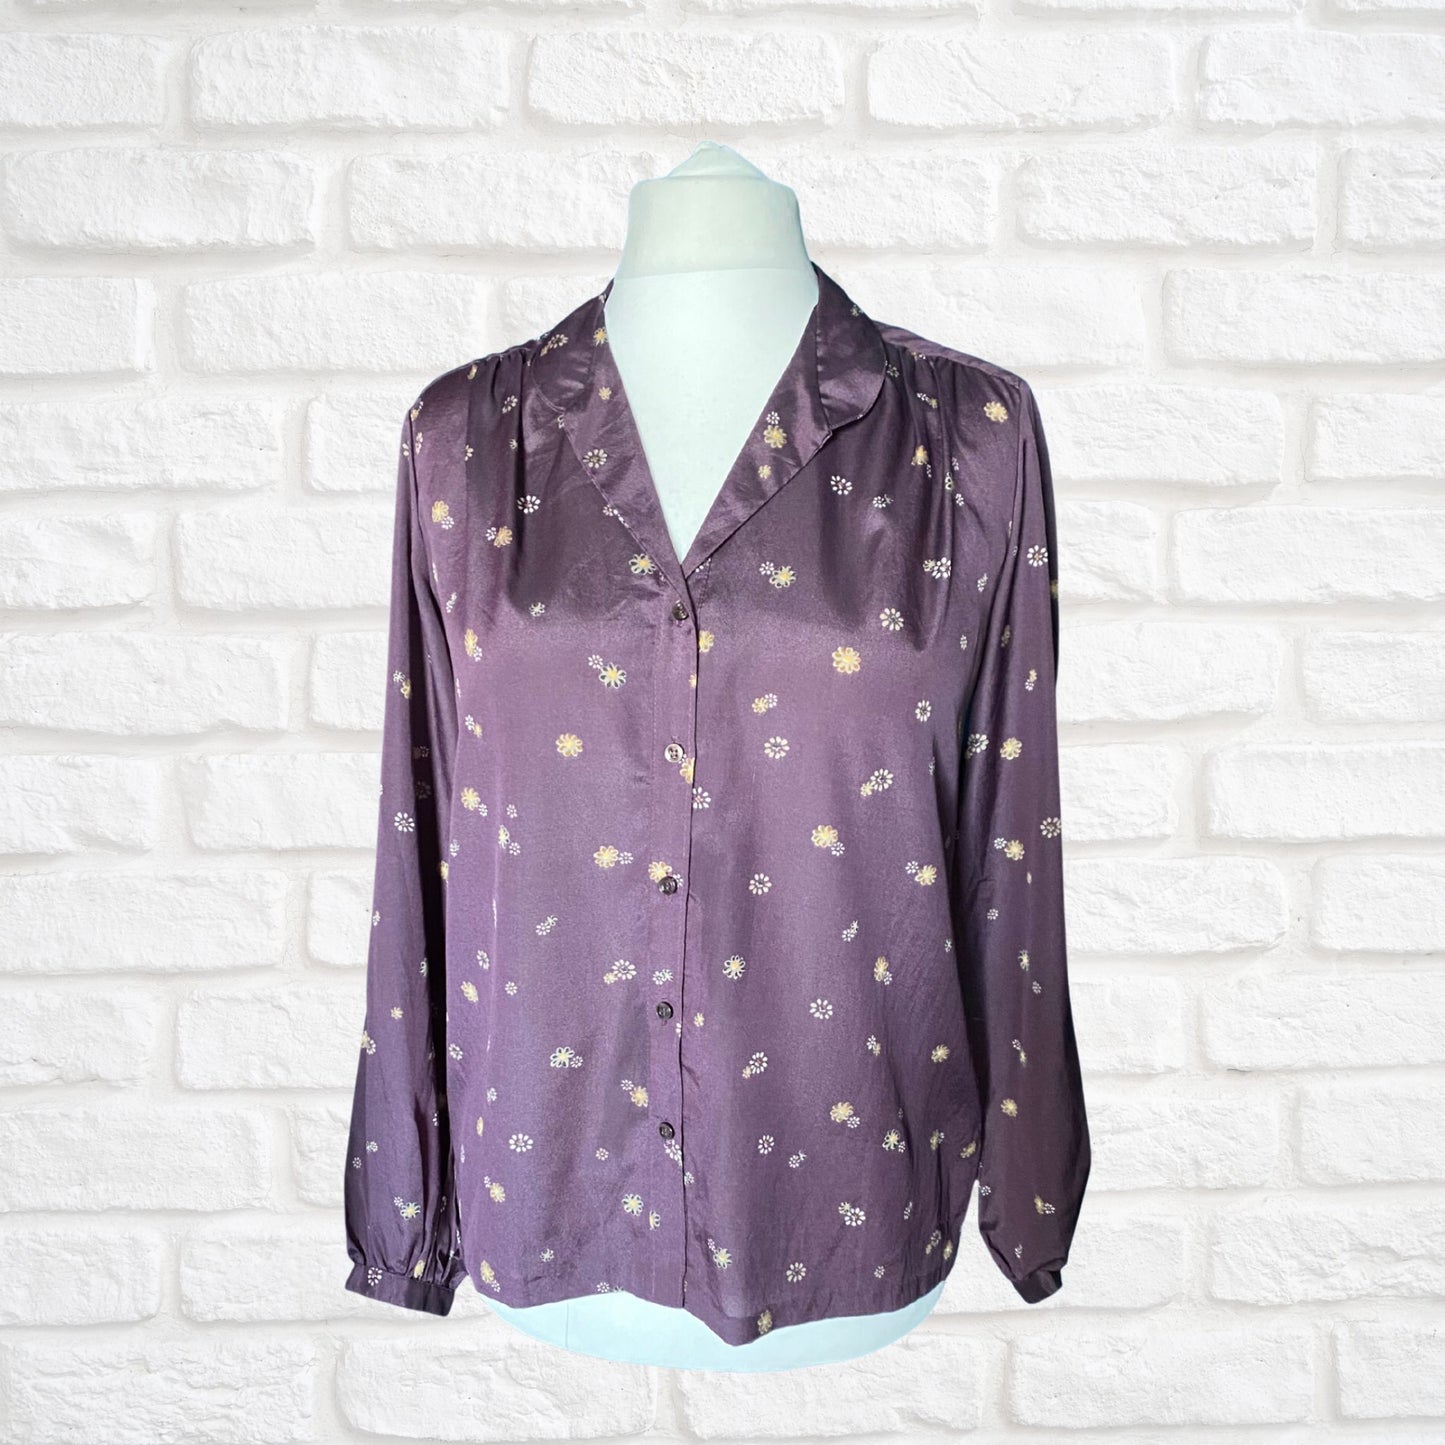 Vintage 60s Purple, White and Gold Silky Floral Blouse . Approx UK size 14-18